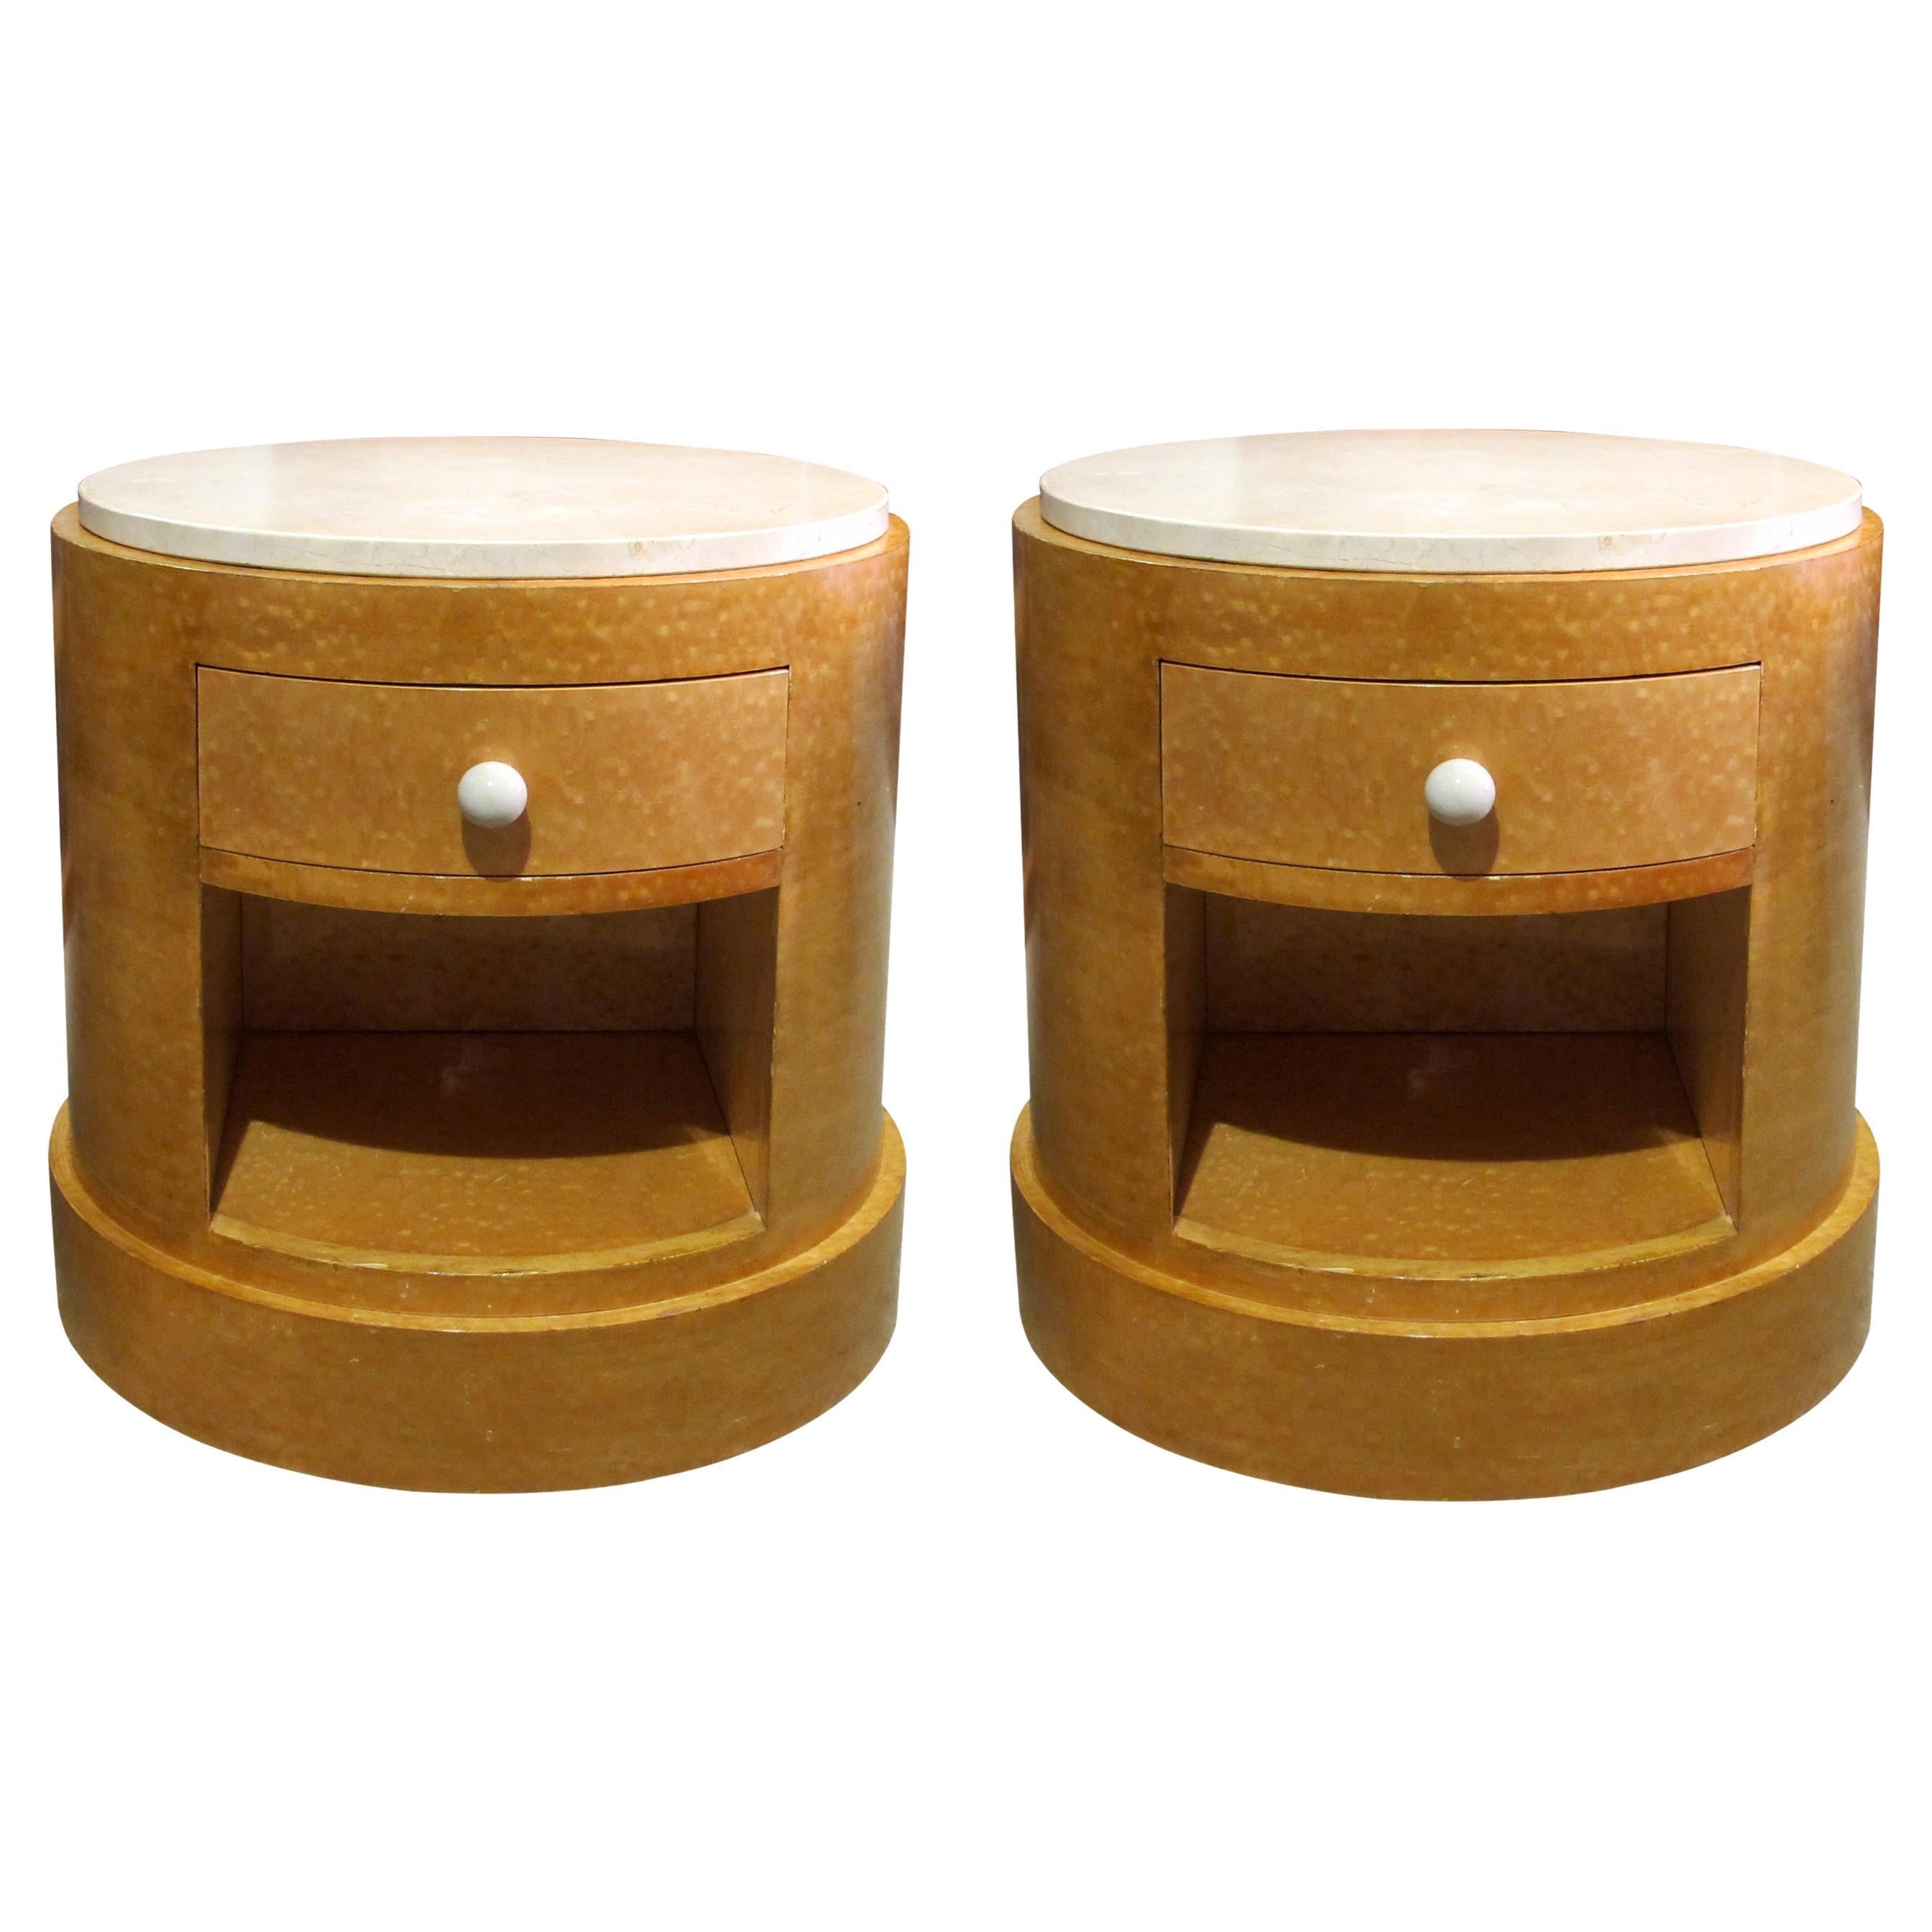 Pair of Mid-Century Modern Art Deco Style Cylindrical Side Table or Nightstands